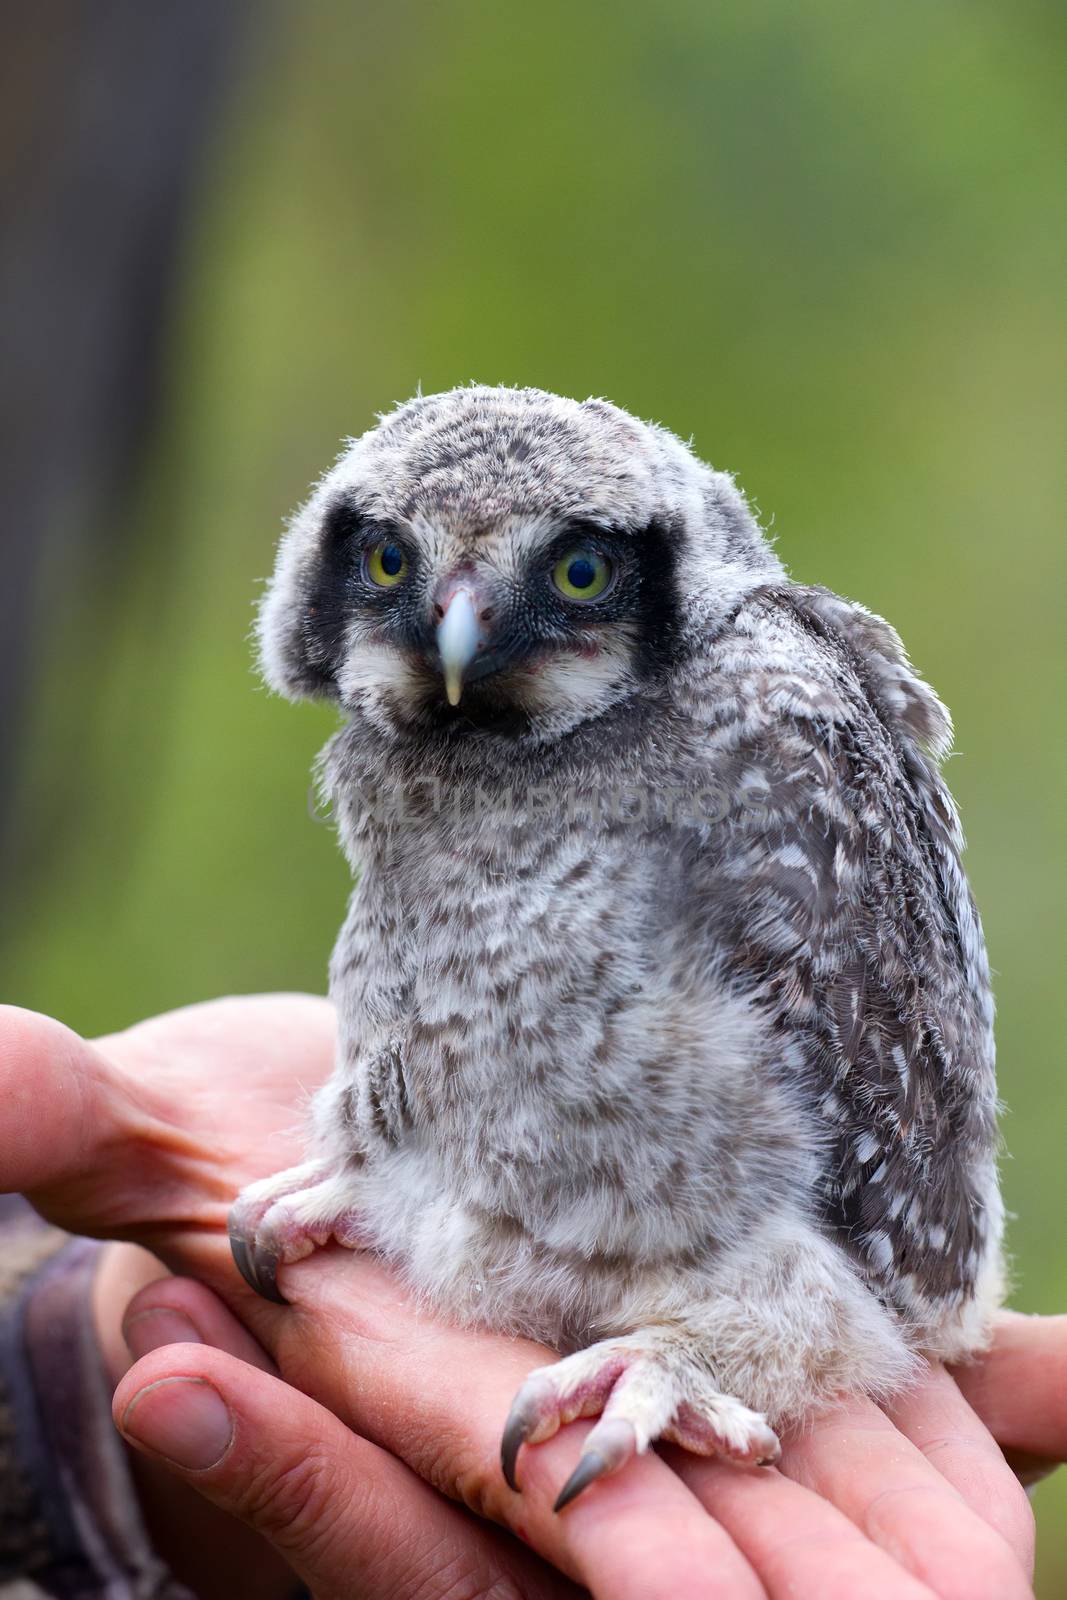 cute fluffy little devil sitting on a person's hand. Owlet.